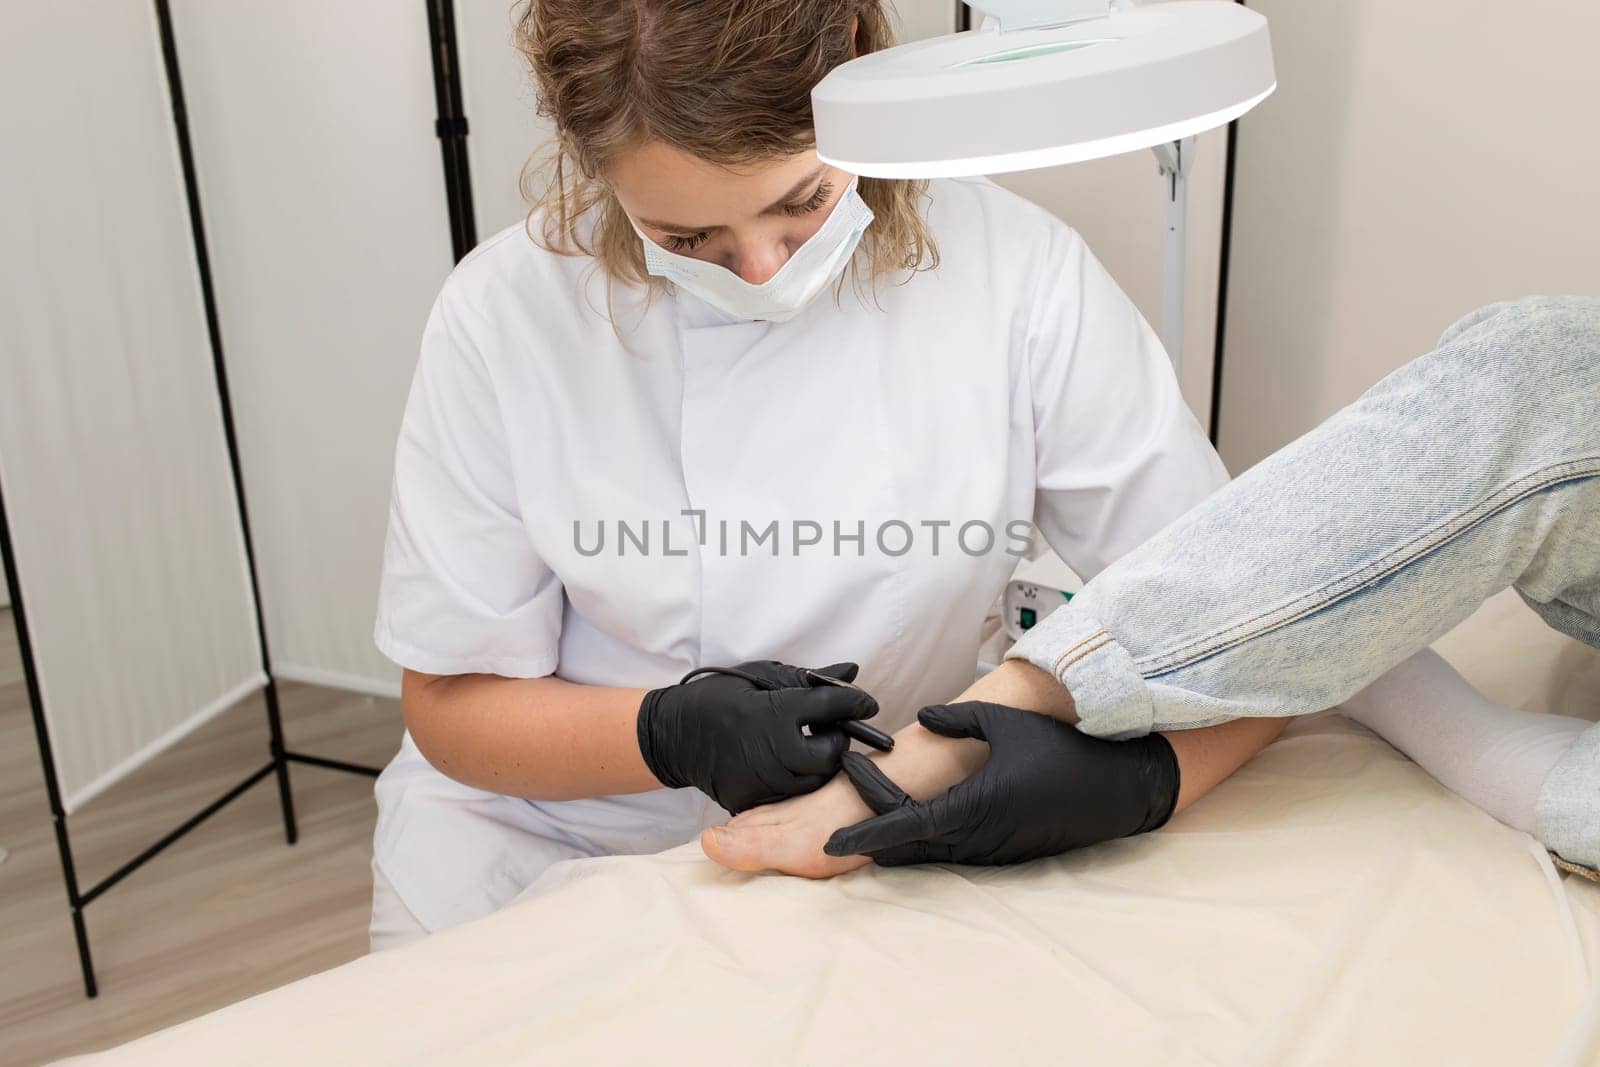 Trained Professional Remove Hair On Woman's Toes, Foot With Hair Removal Electrolysis Procedure. Electric Epilation In Beauty Salon. Horizontal Plane. Closeup Authentic High quality photo